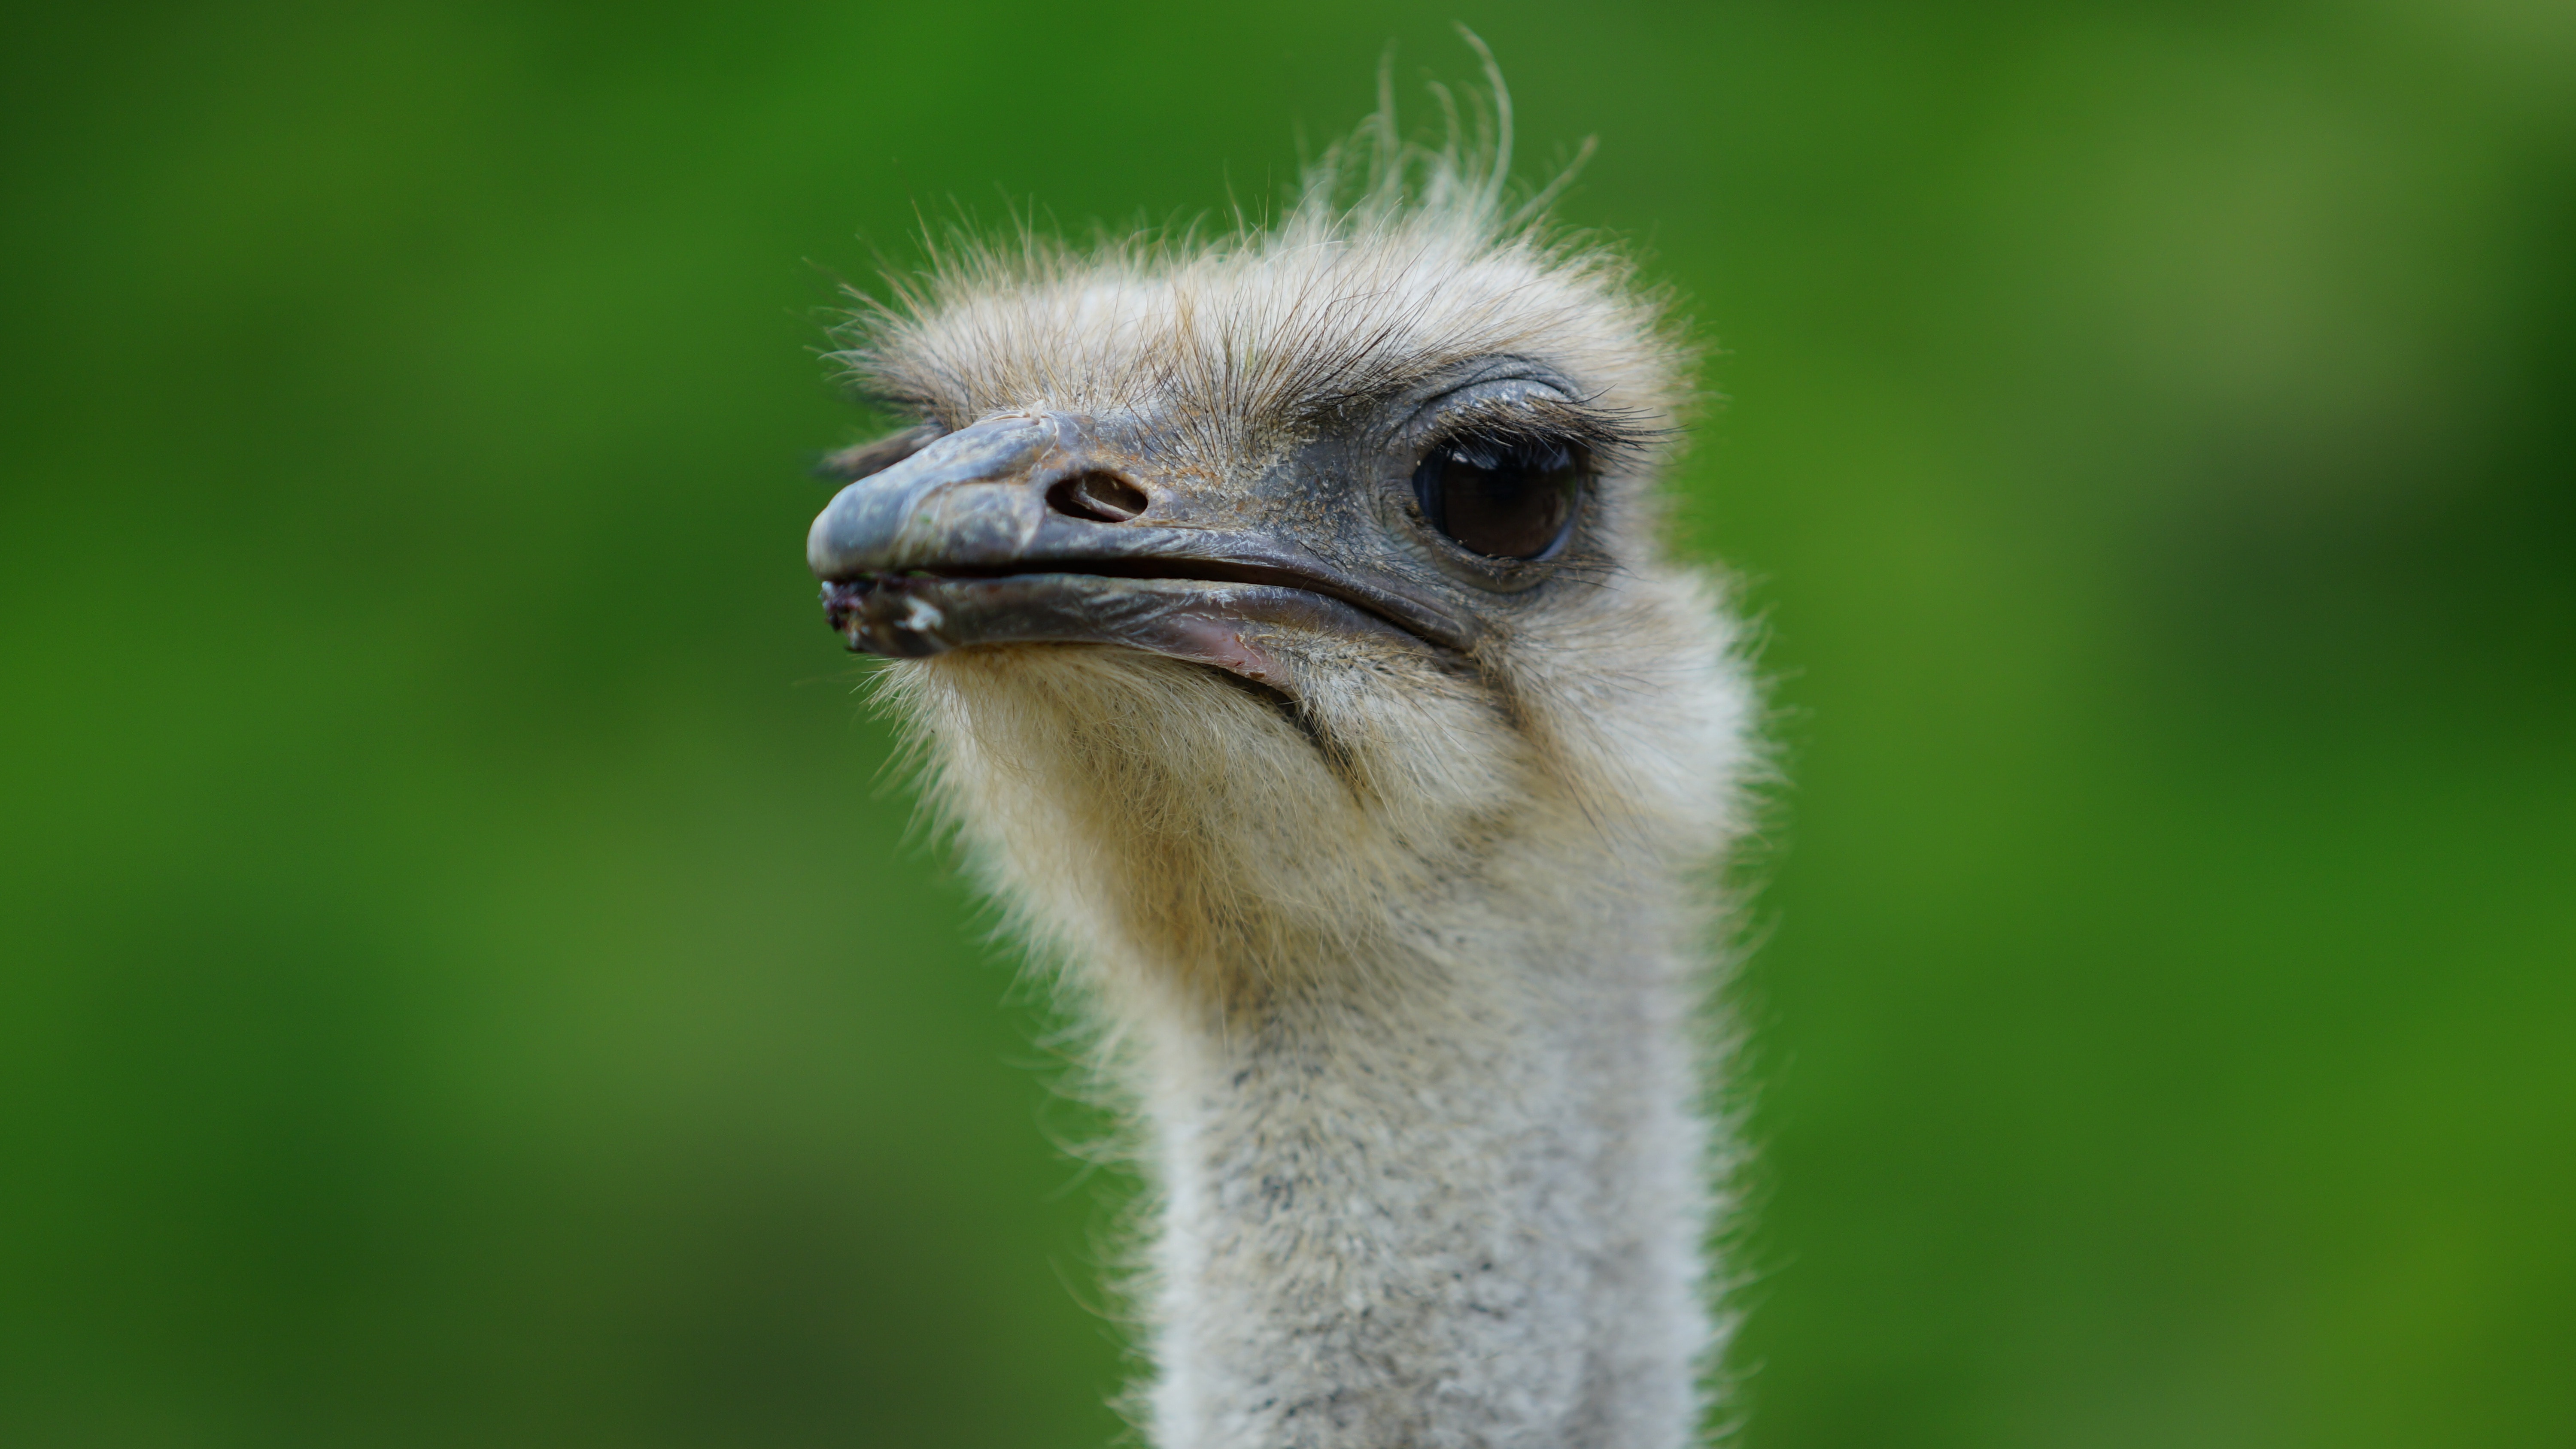 ostrich close up photo during daytime